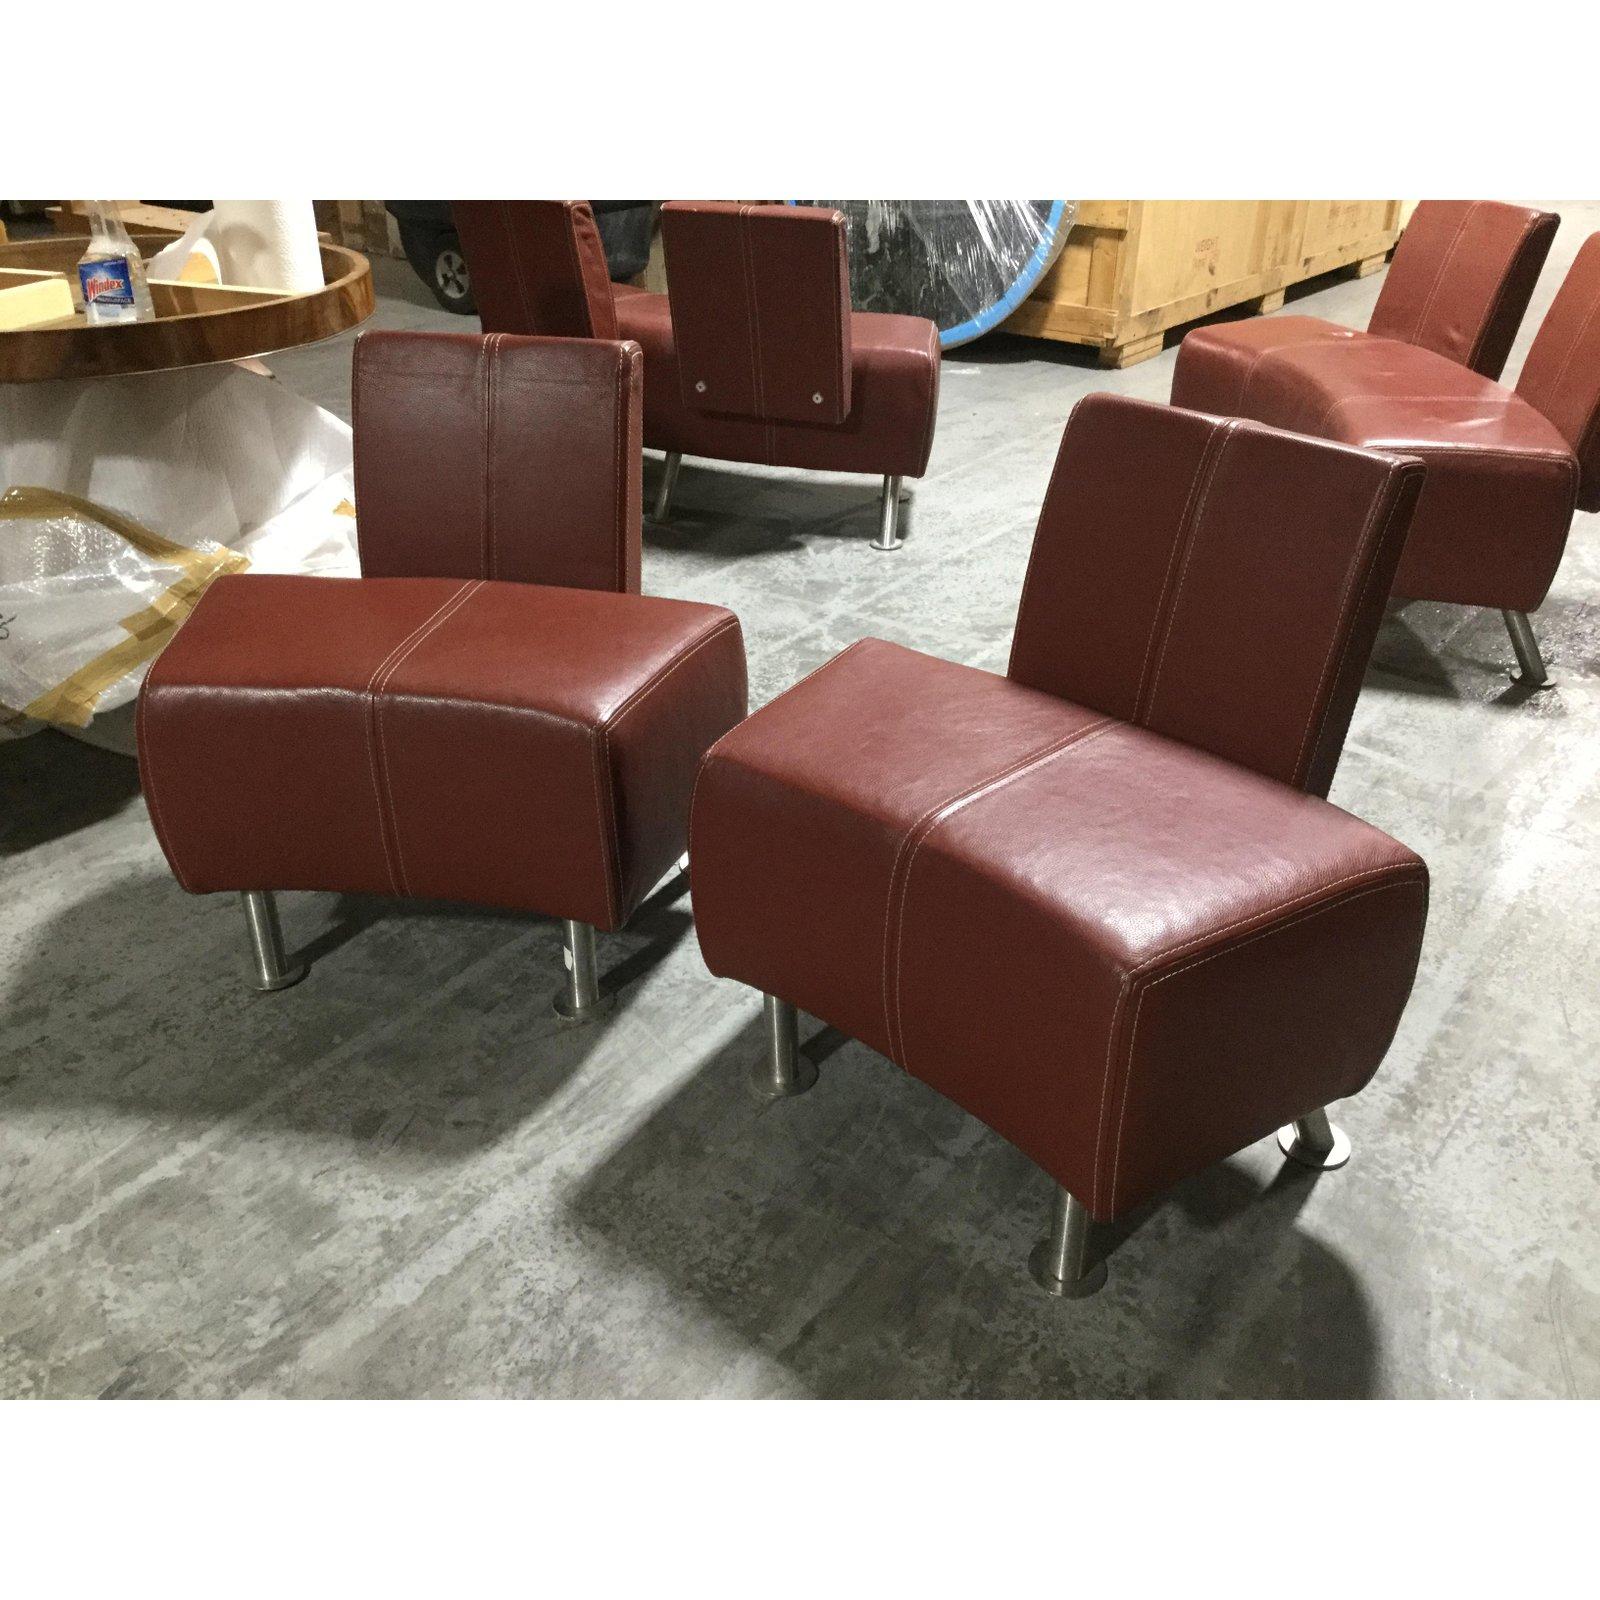 Mid-Century Modern Chic Italian Industrial Leather Salon Set with Two Chairs and Loveseat